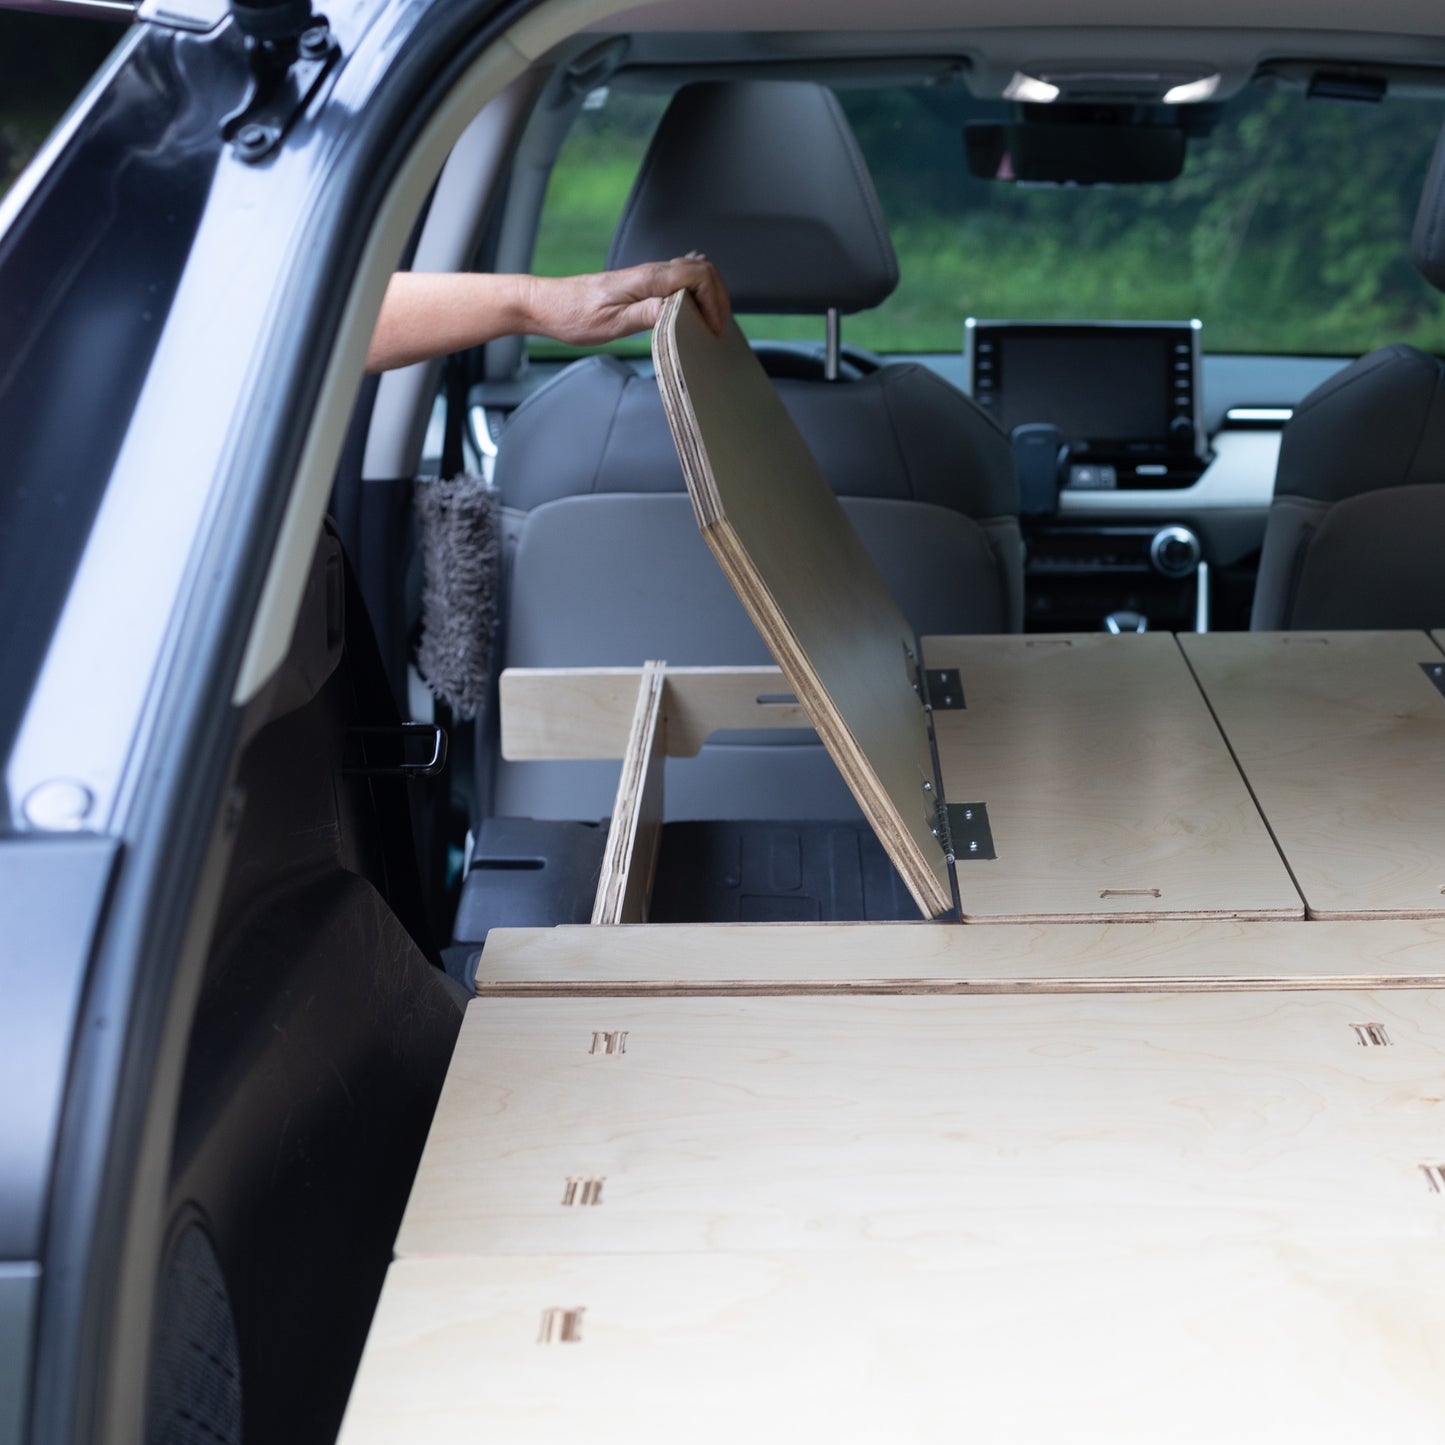 A person is opening the trunk of a CarToCamp Toyota RAV4 Sleeping Platform to access storage space.